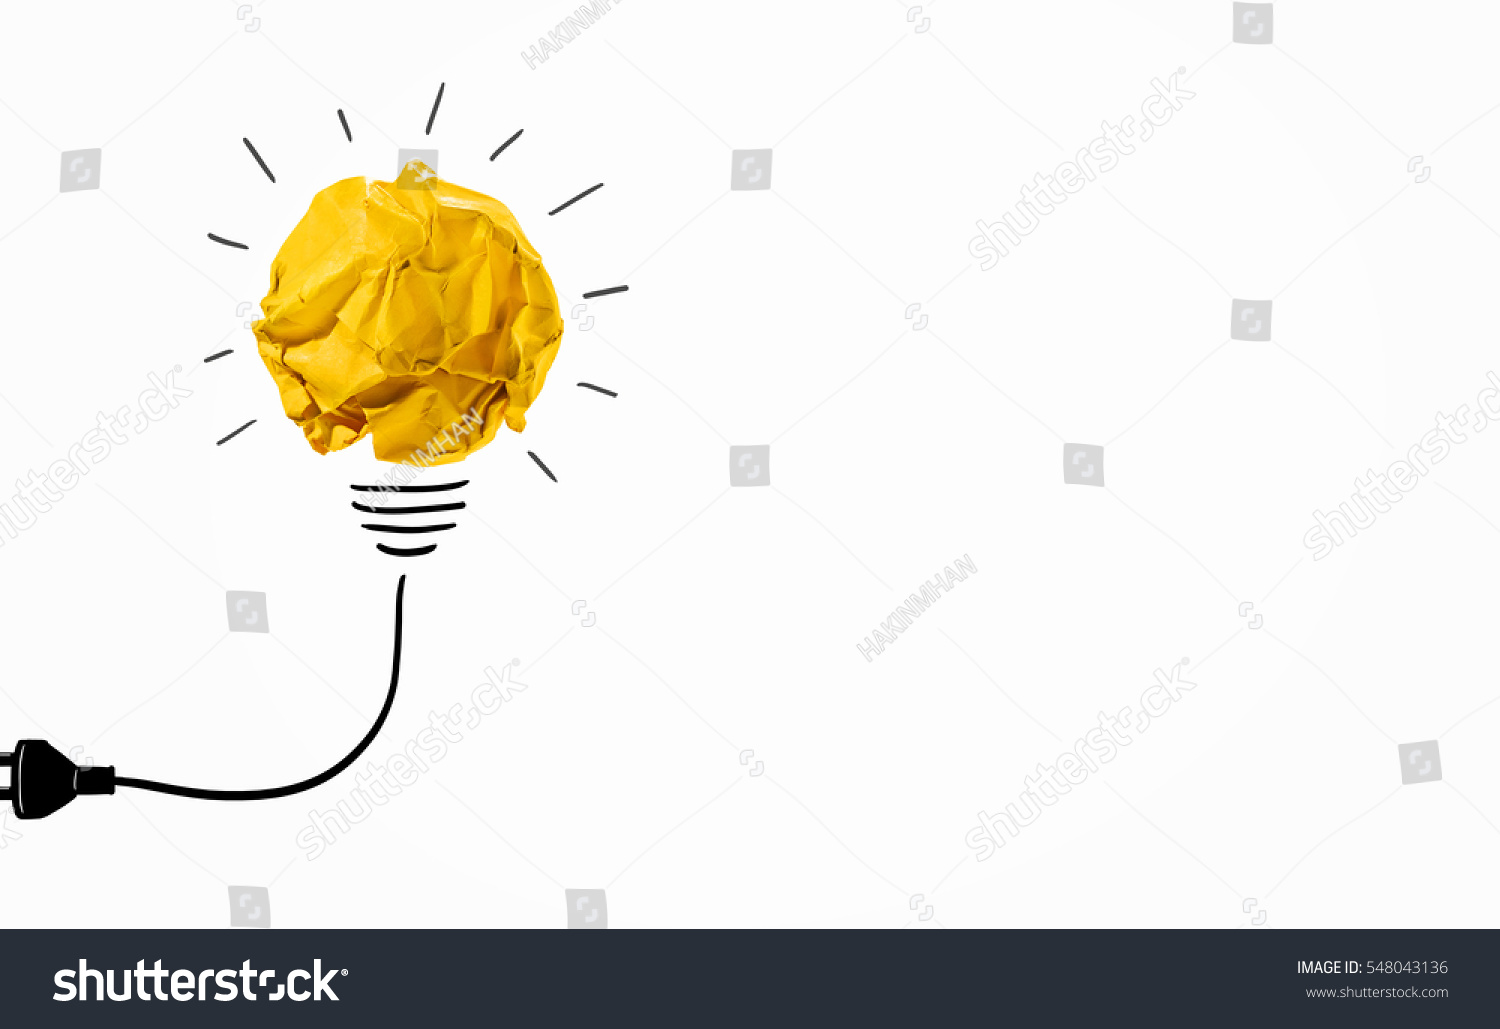 Ideas with yellow crumpled paper ball ( lightbulb ).Creative business concept.
 #548043136